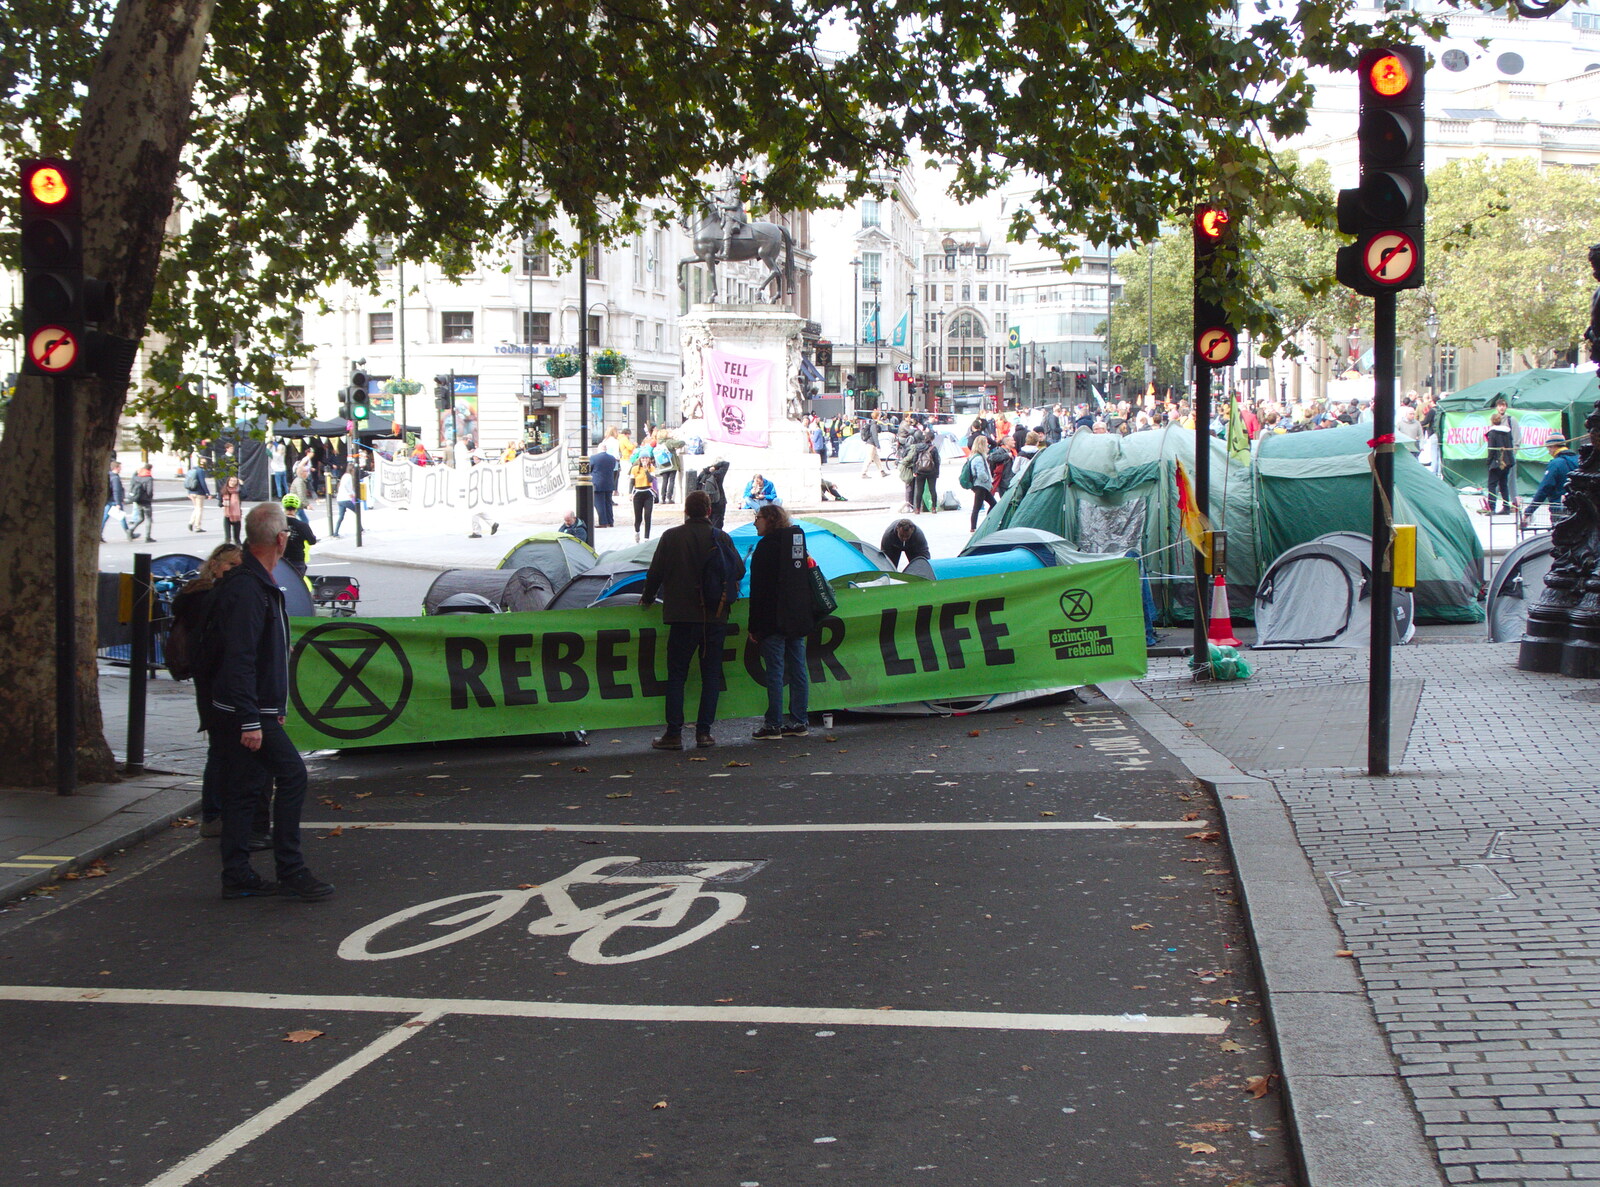 Northumberland Avenue is blocked off from The Extinction Rebellion Protest, Westminster, London - 9th October 2019